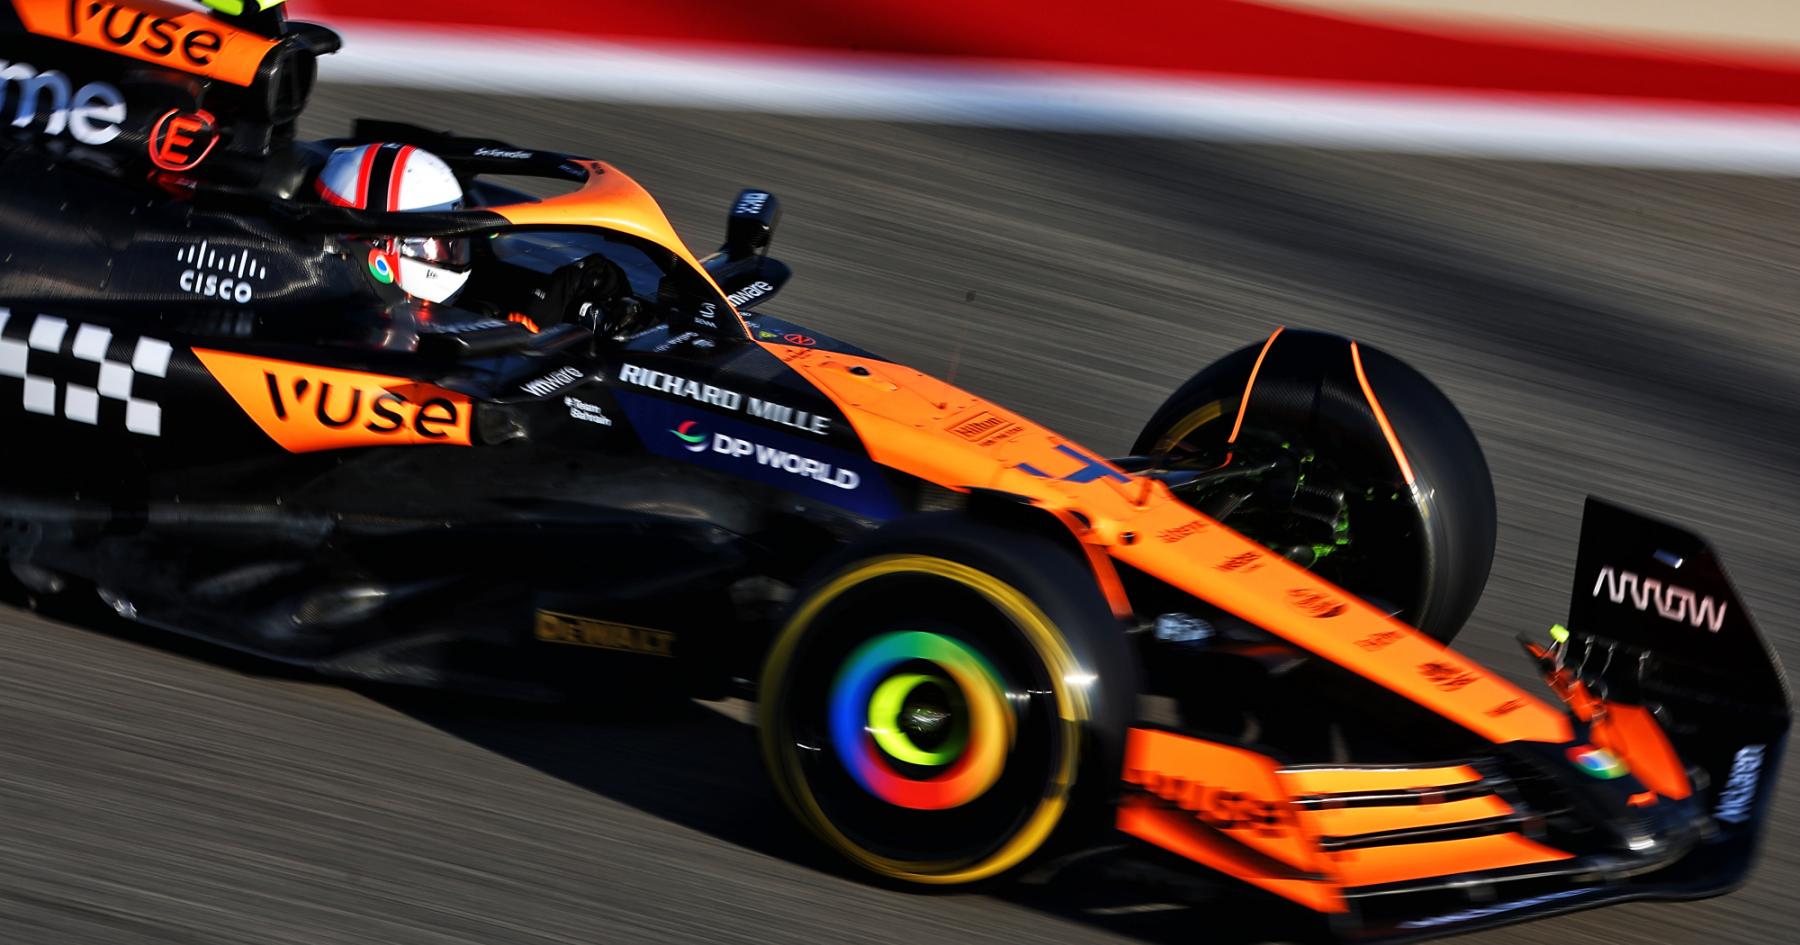 Revving towards Victory: McLaren's Norris and the Triumph of Progress